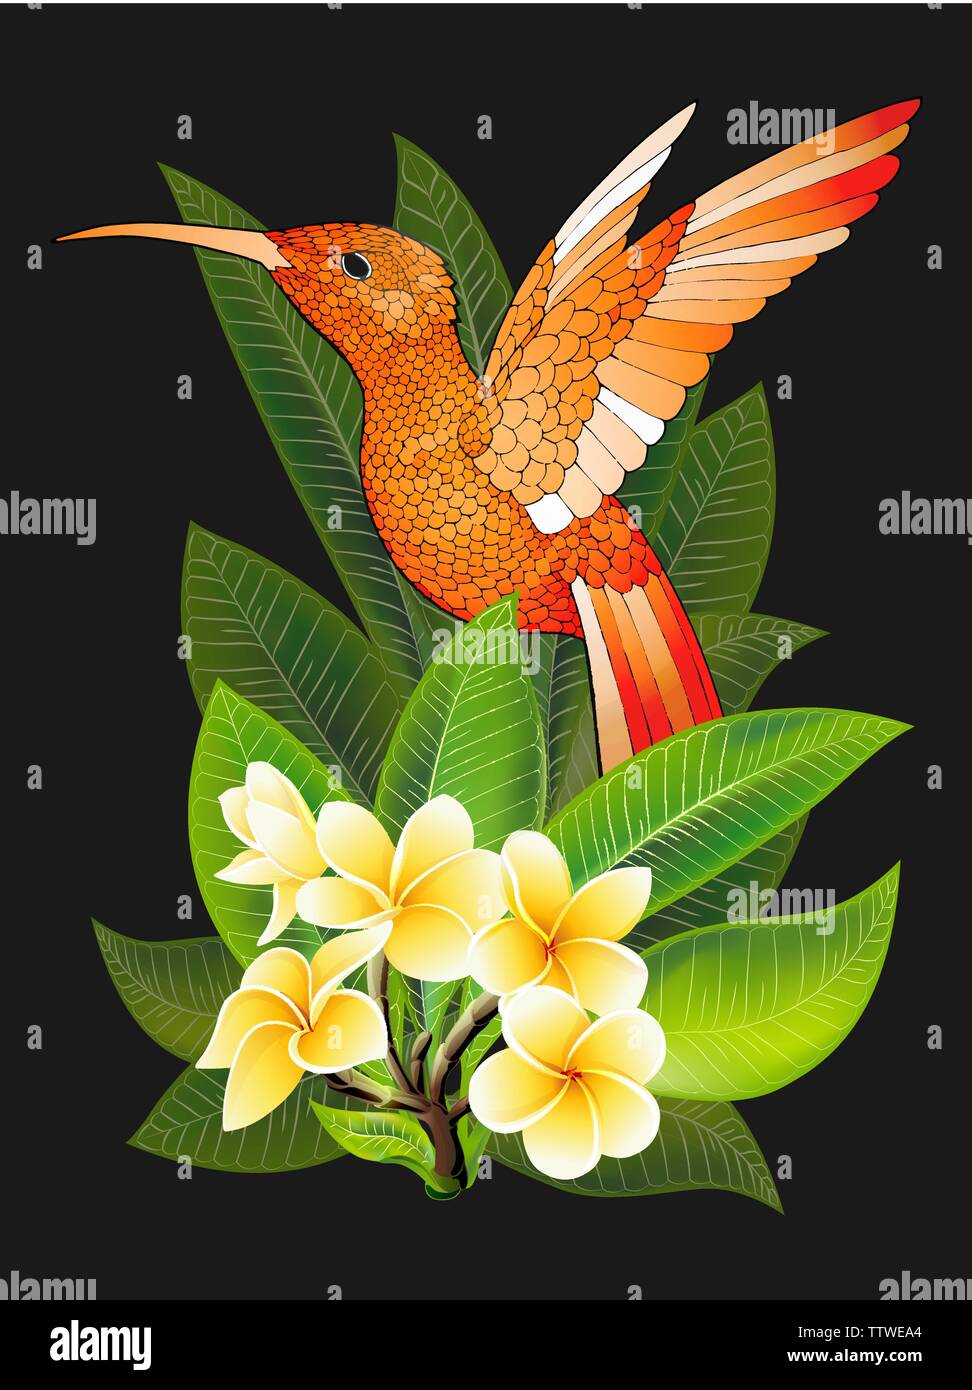 Summer design for advertising with hummingbird, tropical leaves and flowers Stock Vector